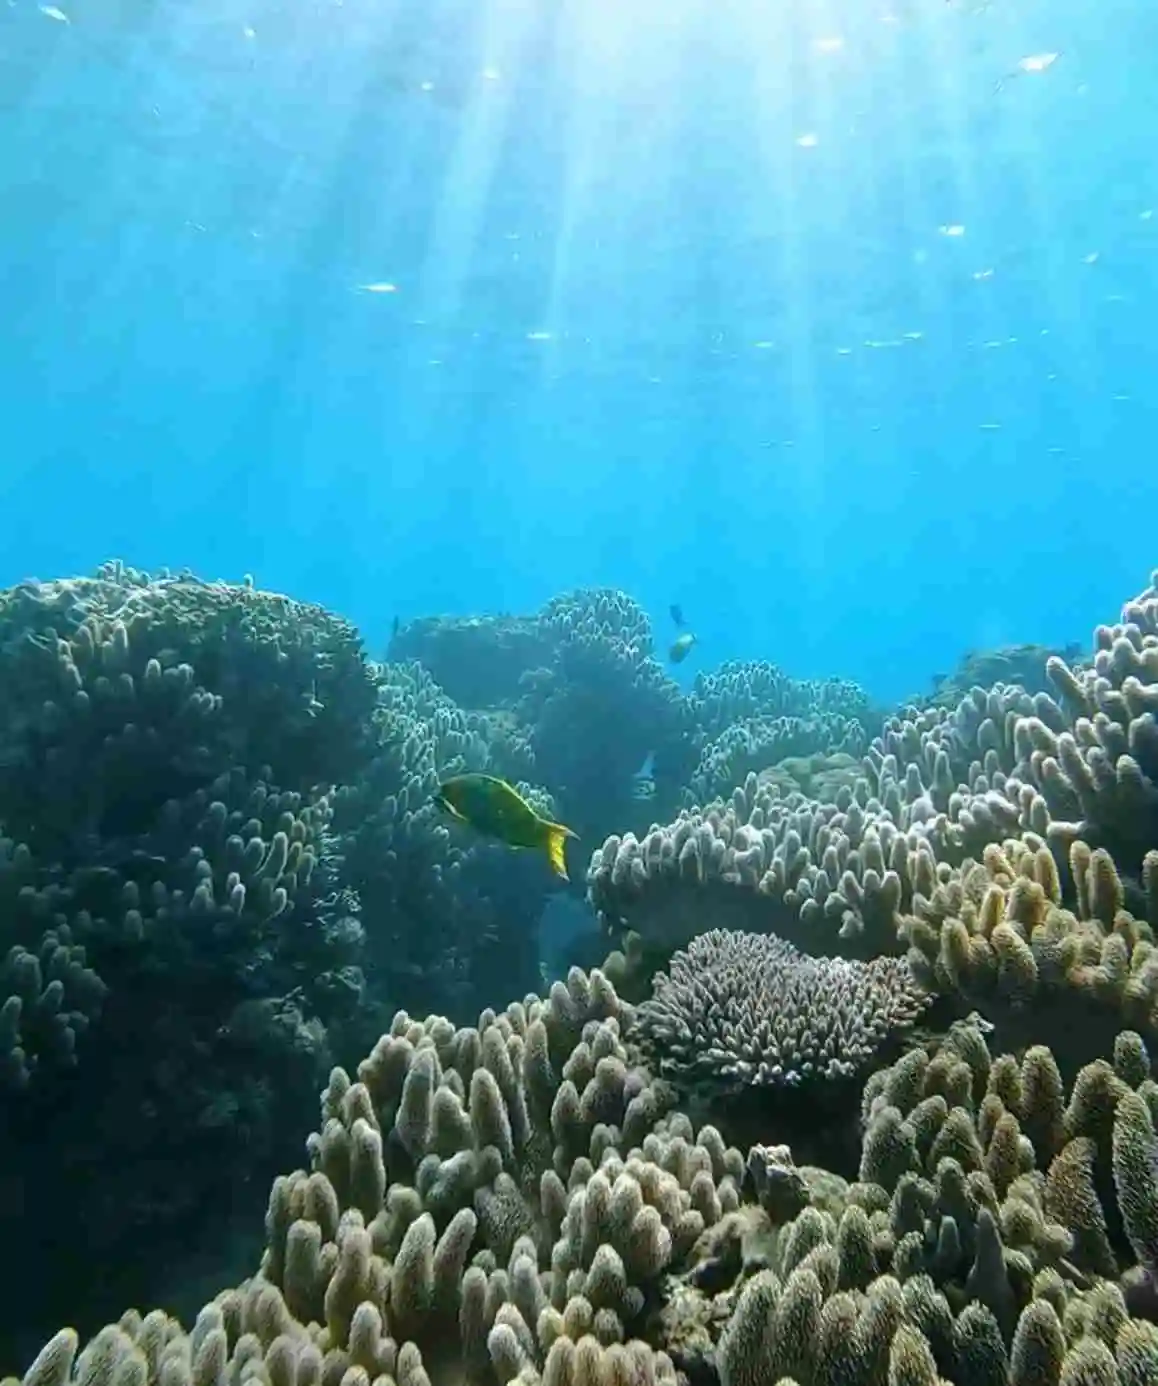 Sunlight filtering through the ocean with a vibrant coral reef and tropical fish